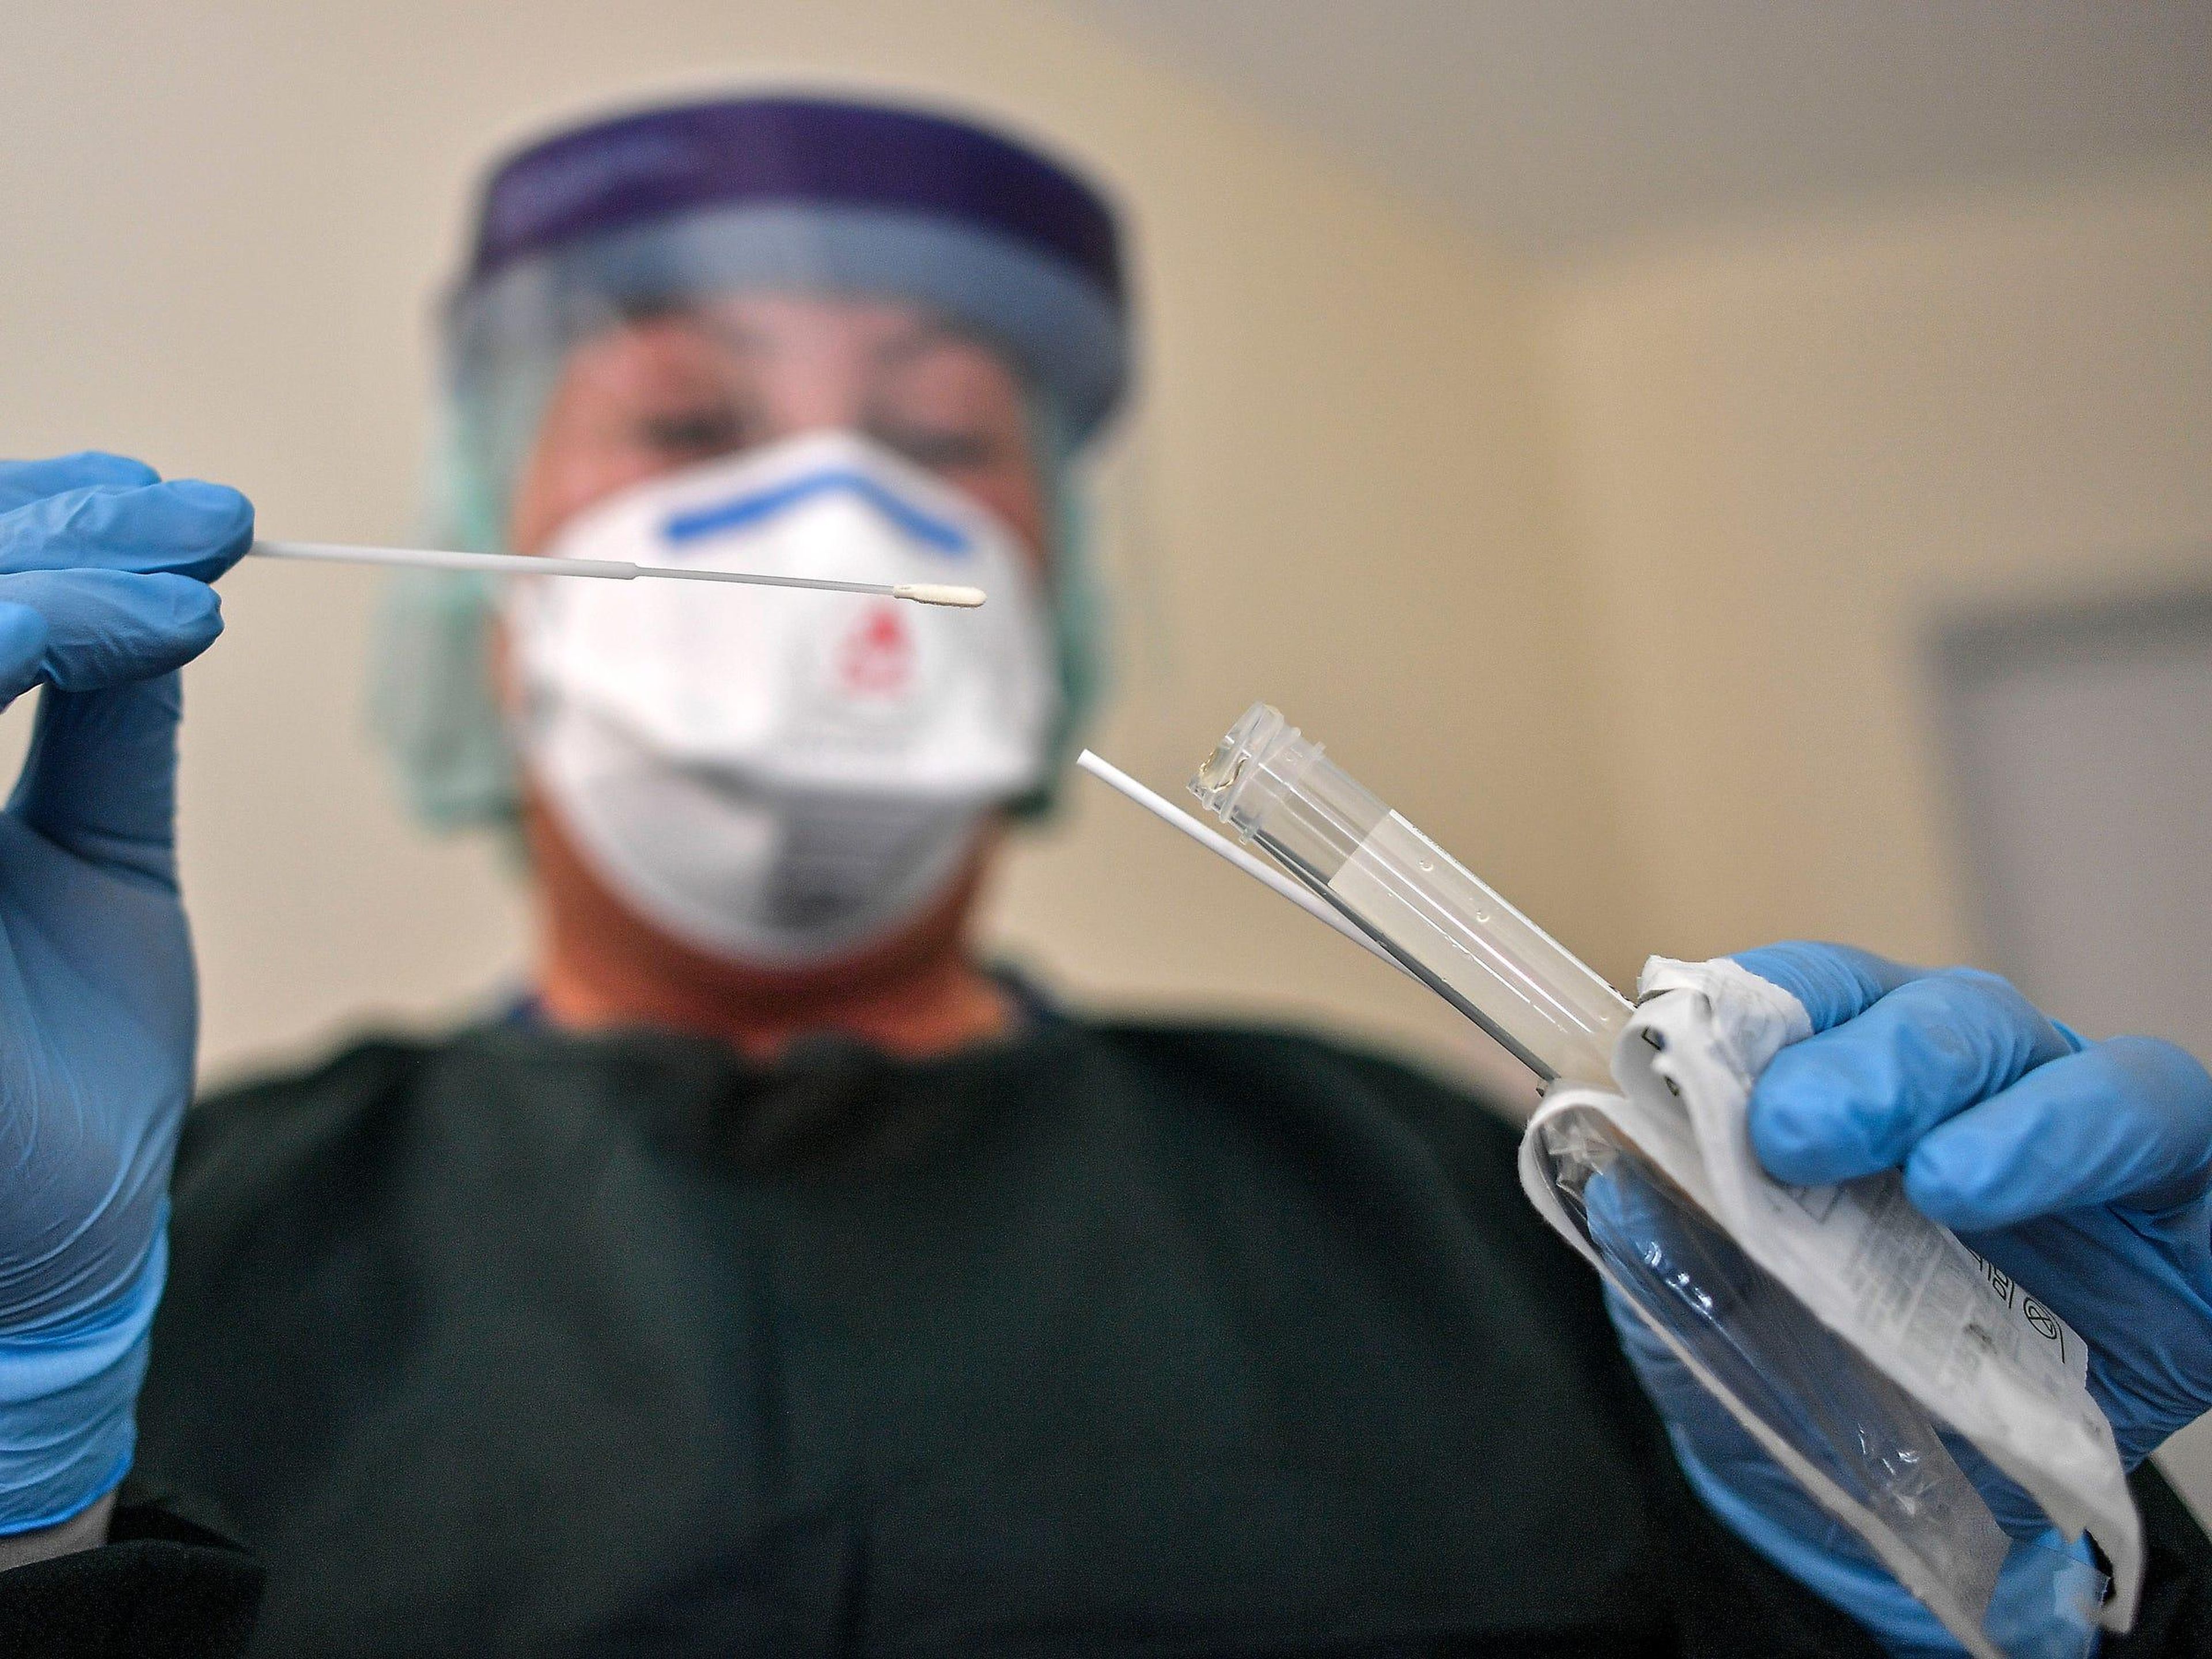 A nurse demonstrates taking a sample for a coronavirus test at the infection station of the university hospital in Essen, Germany, Thursday, March 12, 2020.